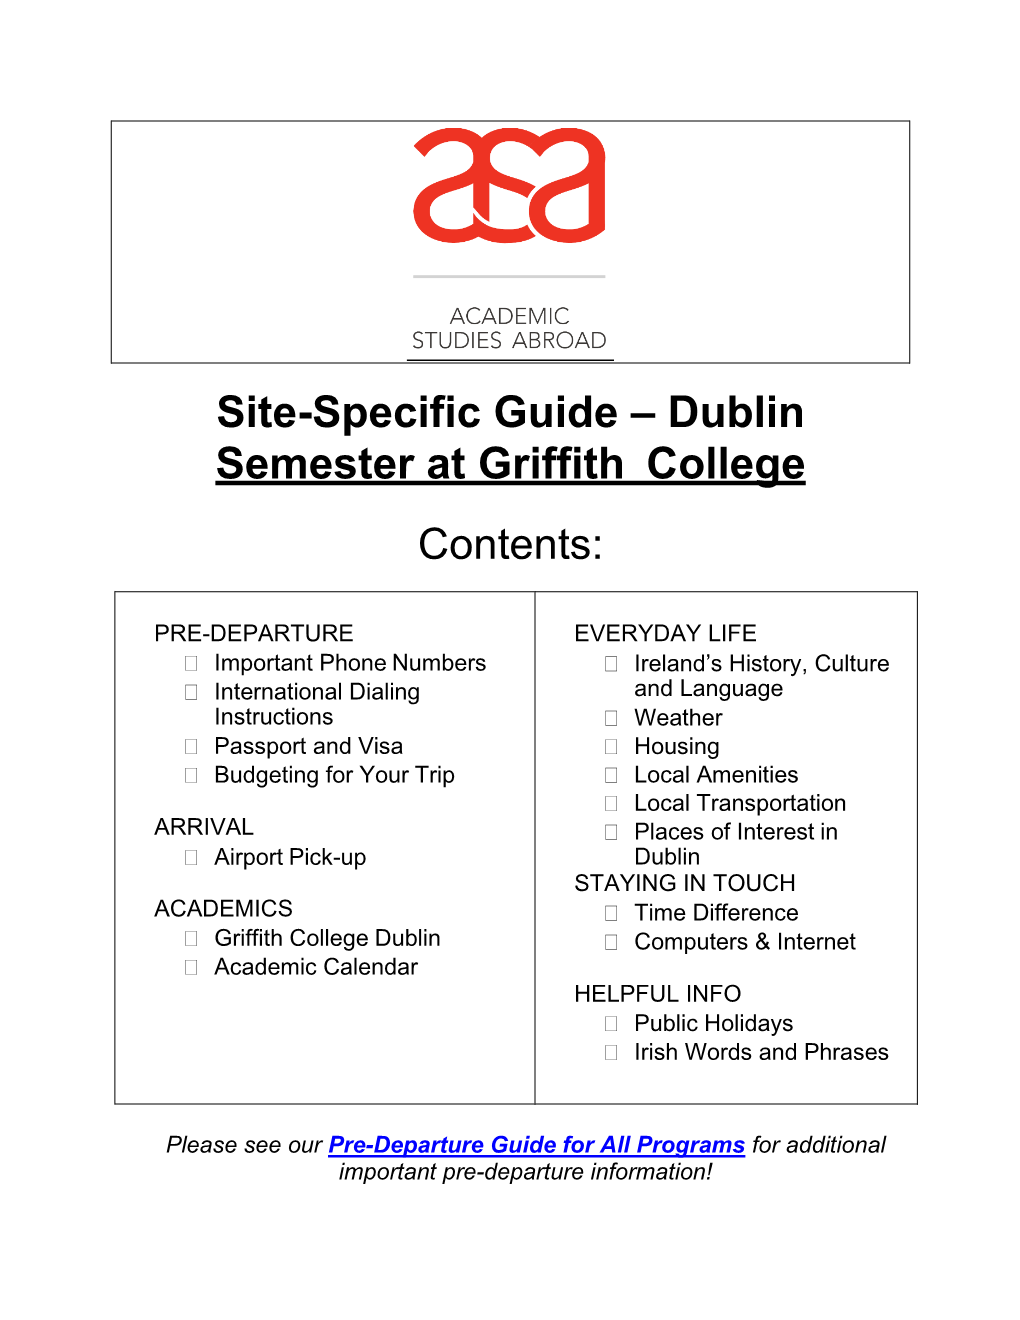 Site-Specific Guide – Dublin Semester at Griffith College Contents